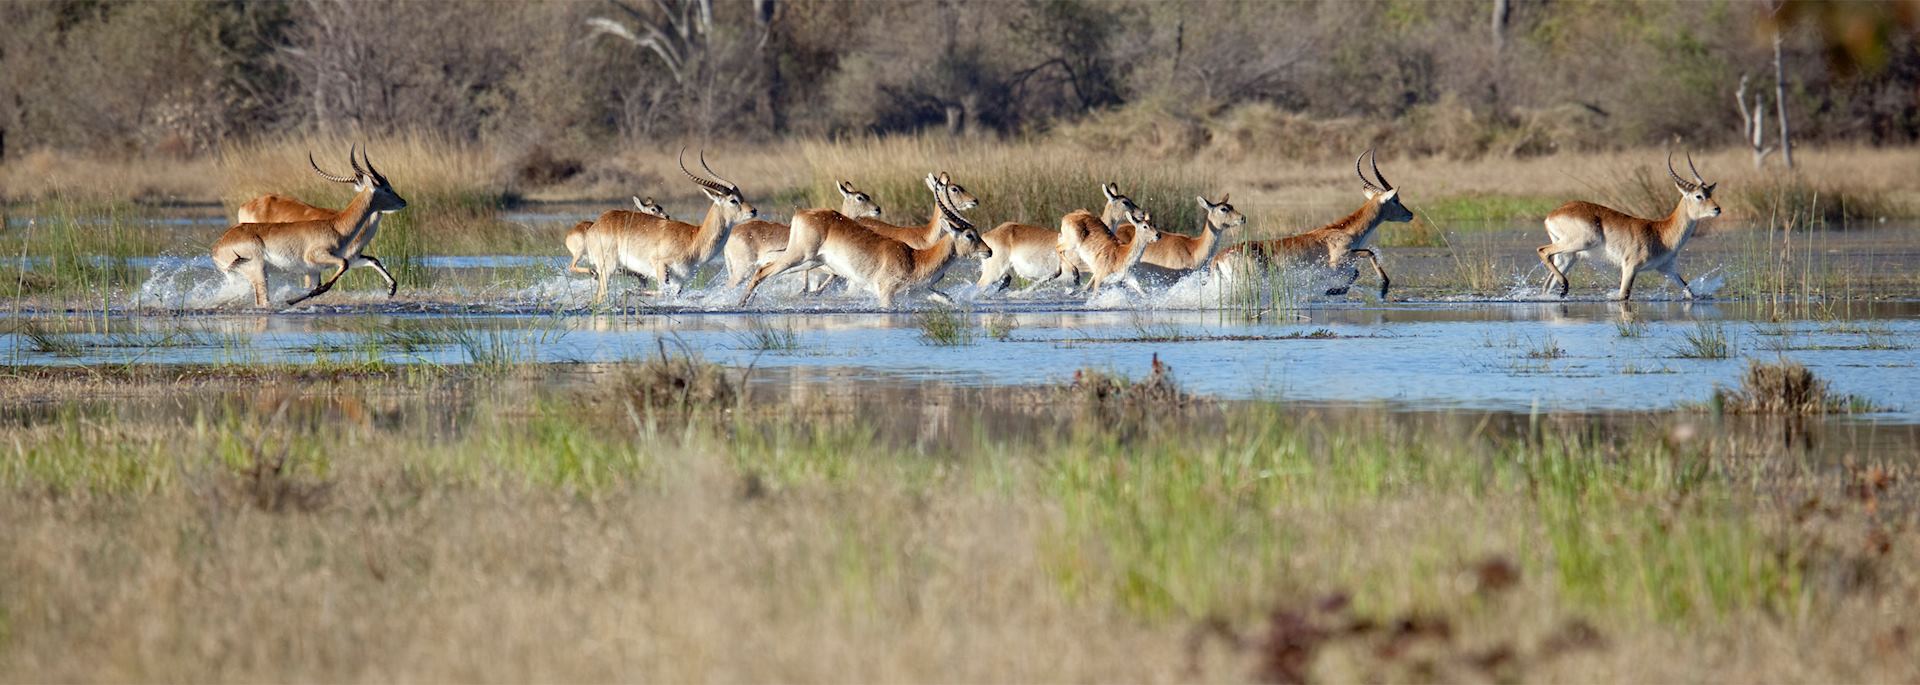 Red lechwe, Khwai Concession